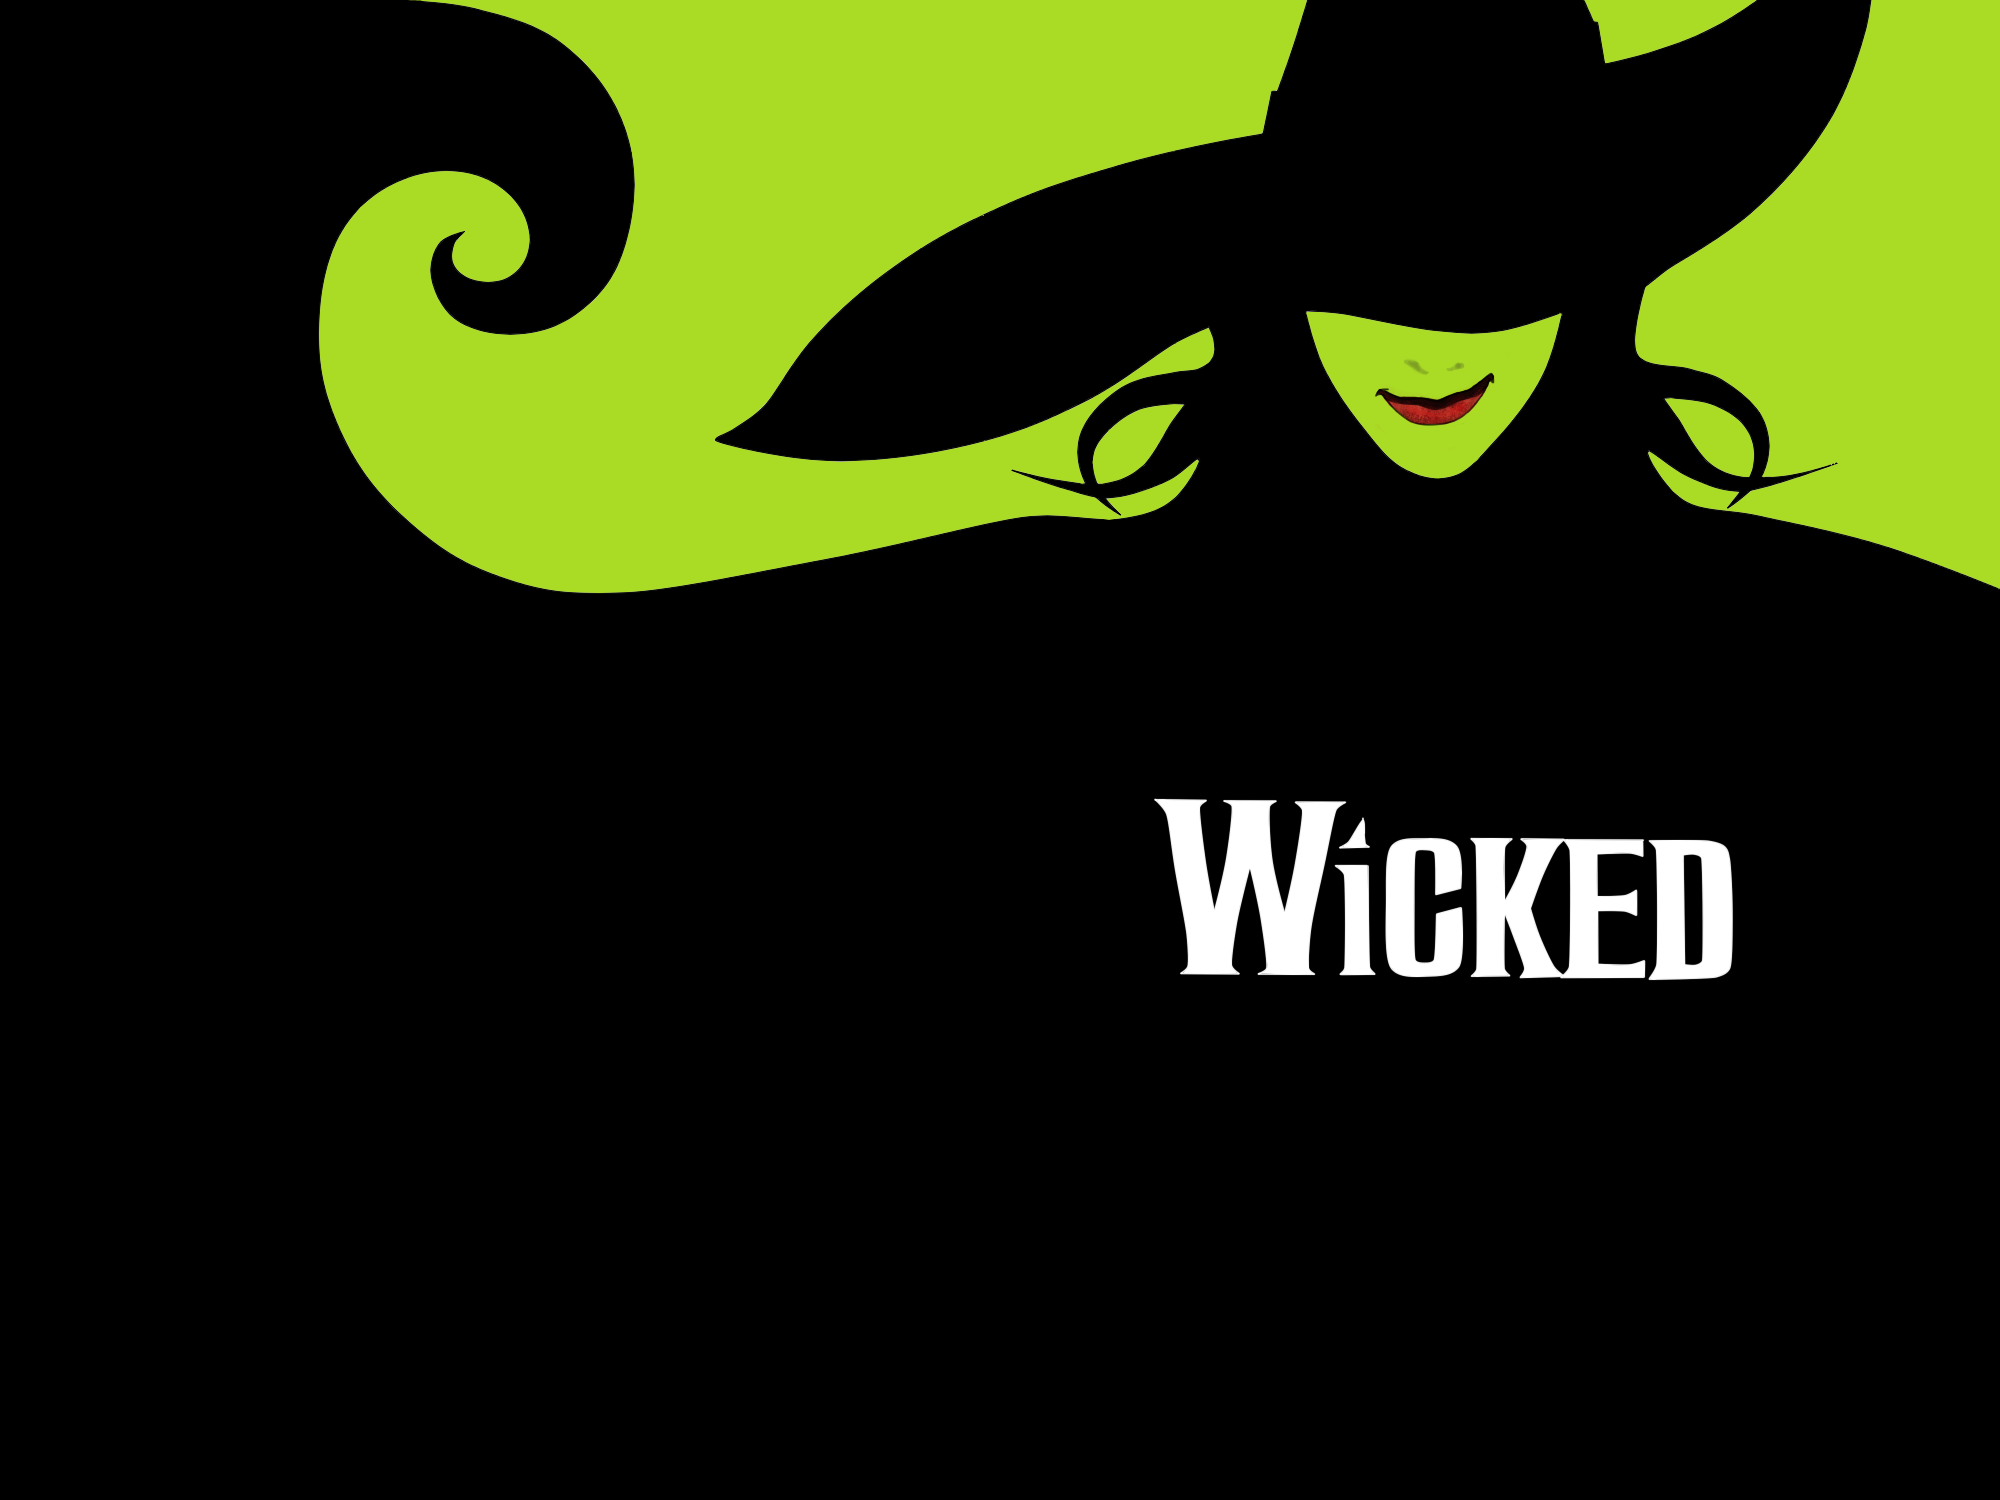 Wicked Wallpaper HQ by Eozon on